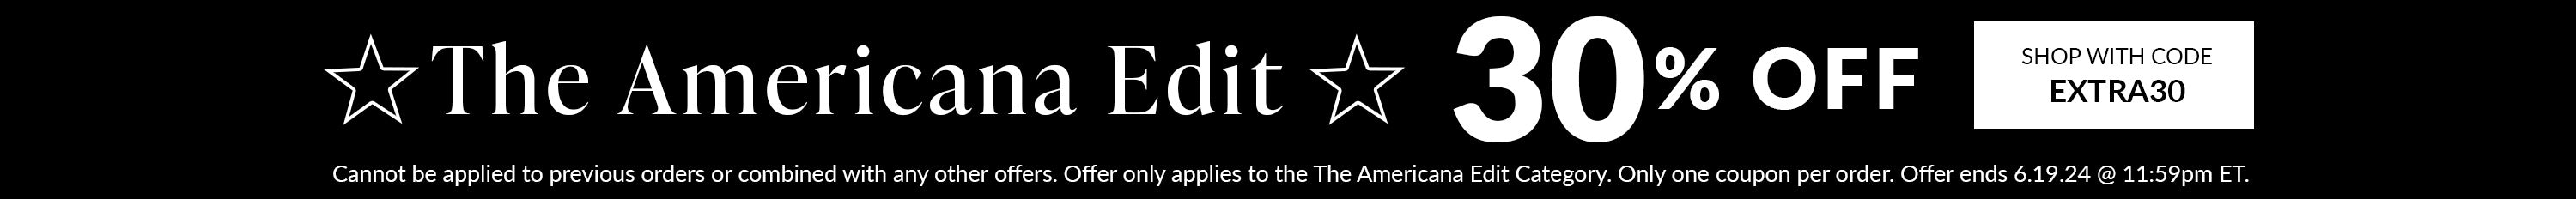 the americana edit 30% off with code EXTRA30. Cannot be applied to previous orders or combined with any other offers. Offer only applies to the The Americana Edit Category. Only one coupon per order. Offer ends 6.19.24 @ 11:59pm ET. 